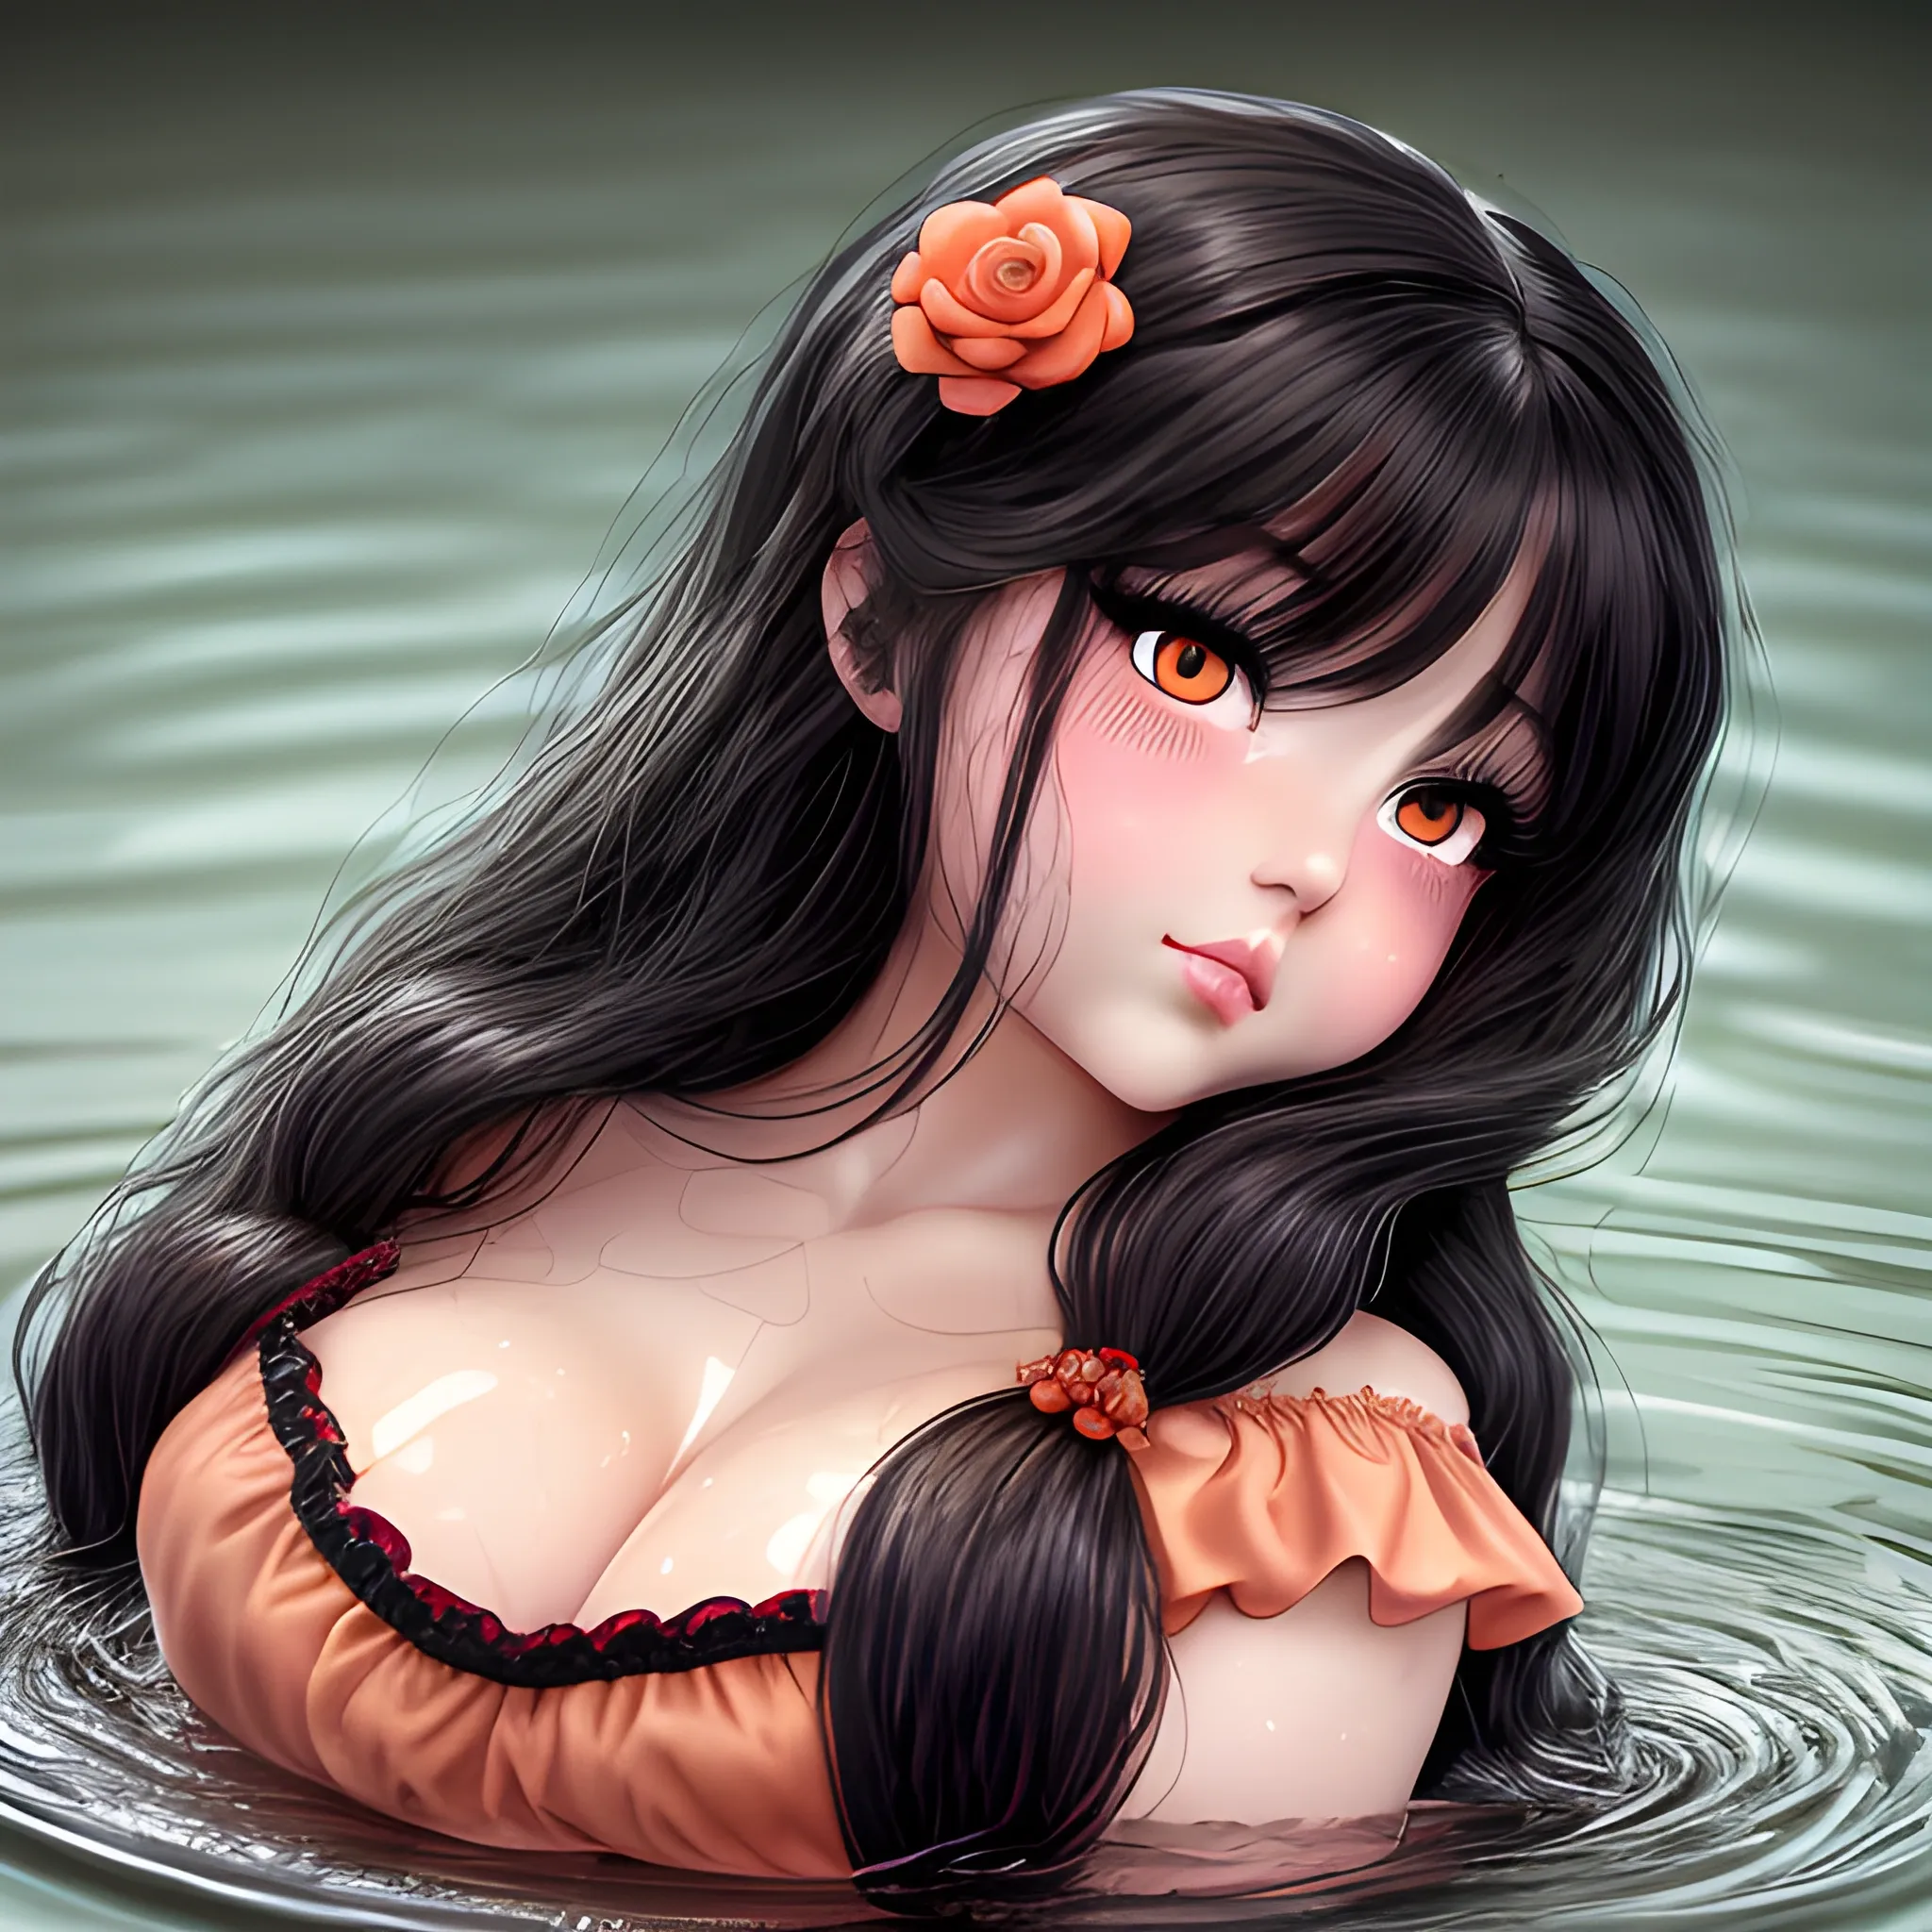 (((high detail))), best quality, Warm Colors, (detailed), (high resolution)Black long-haired female, curvy face, with rosy cheeks, big black eyes, thick eyelashes, thick peach lips, thick eyebrows, nose upturned, lying on water, with a black and red dress. Yo quiero el harem 